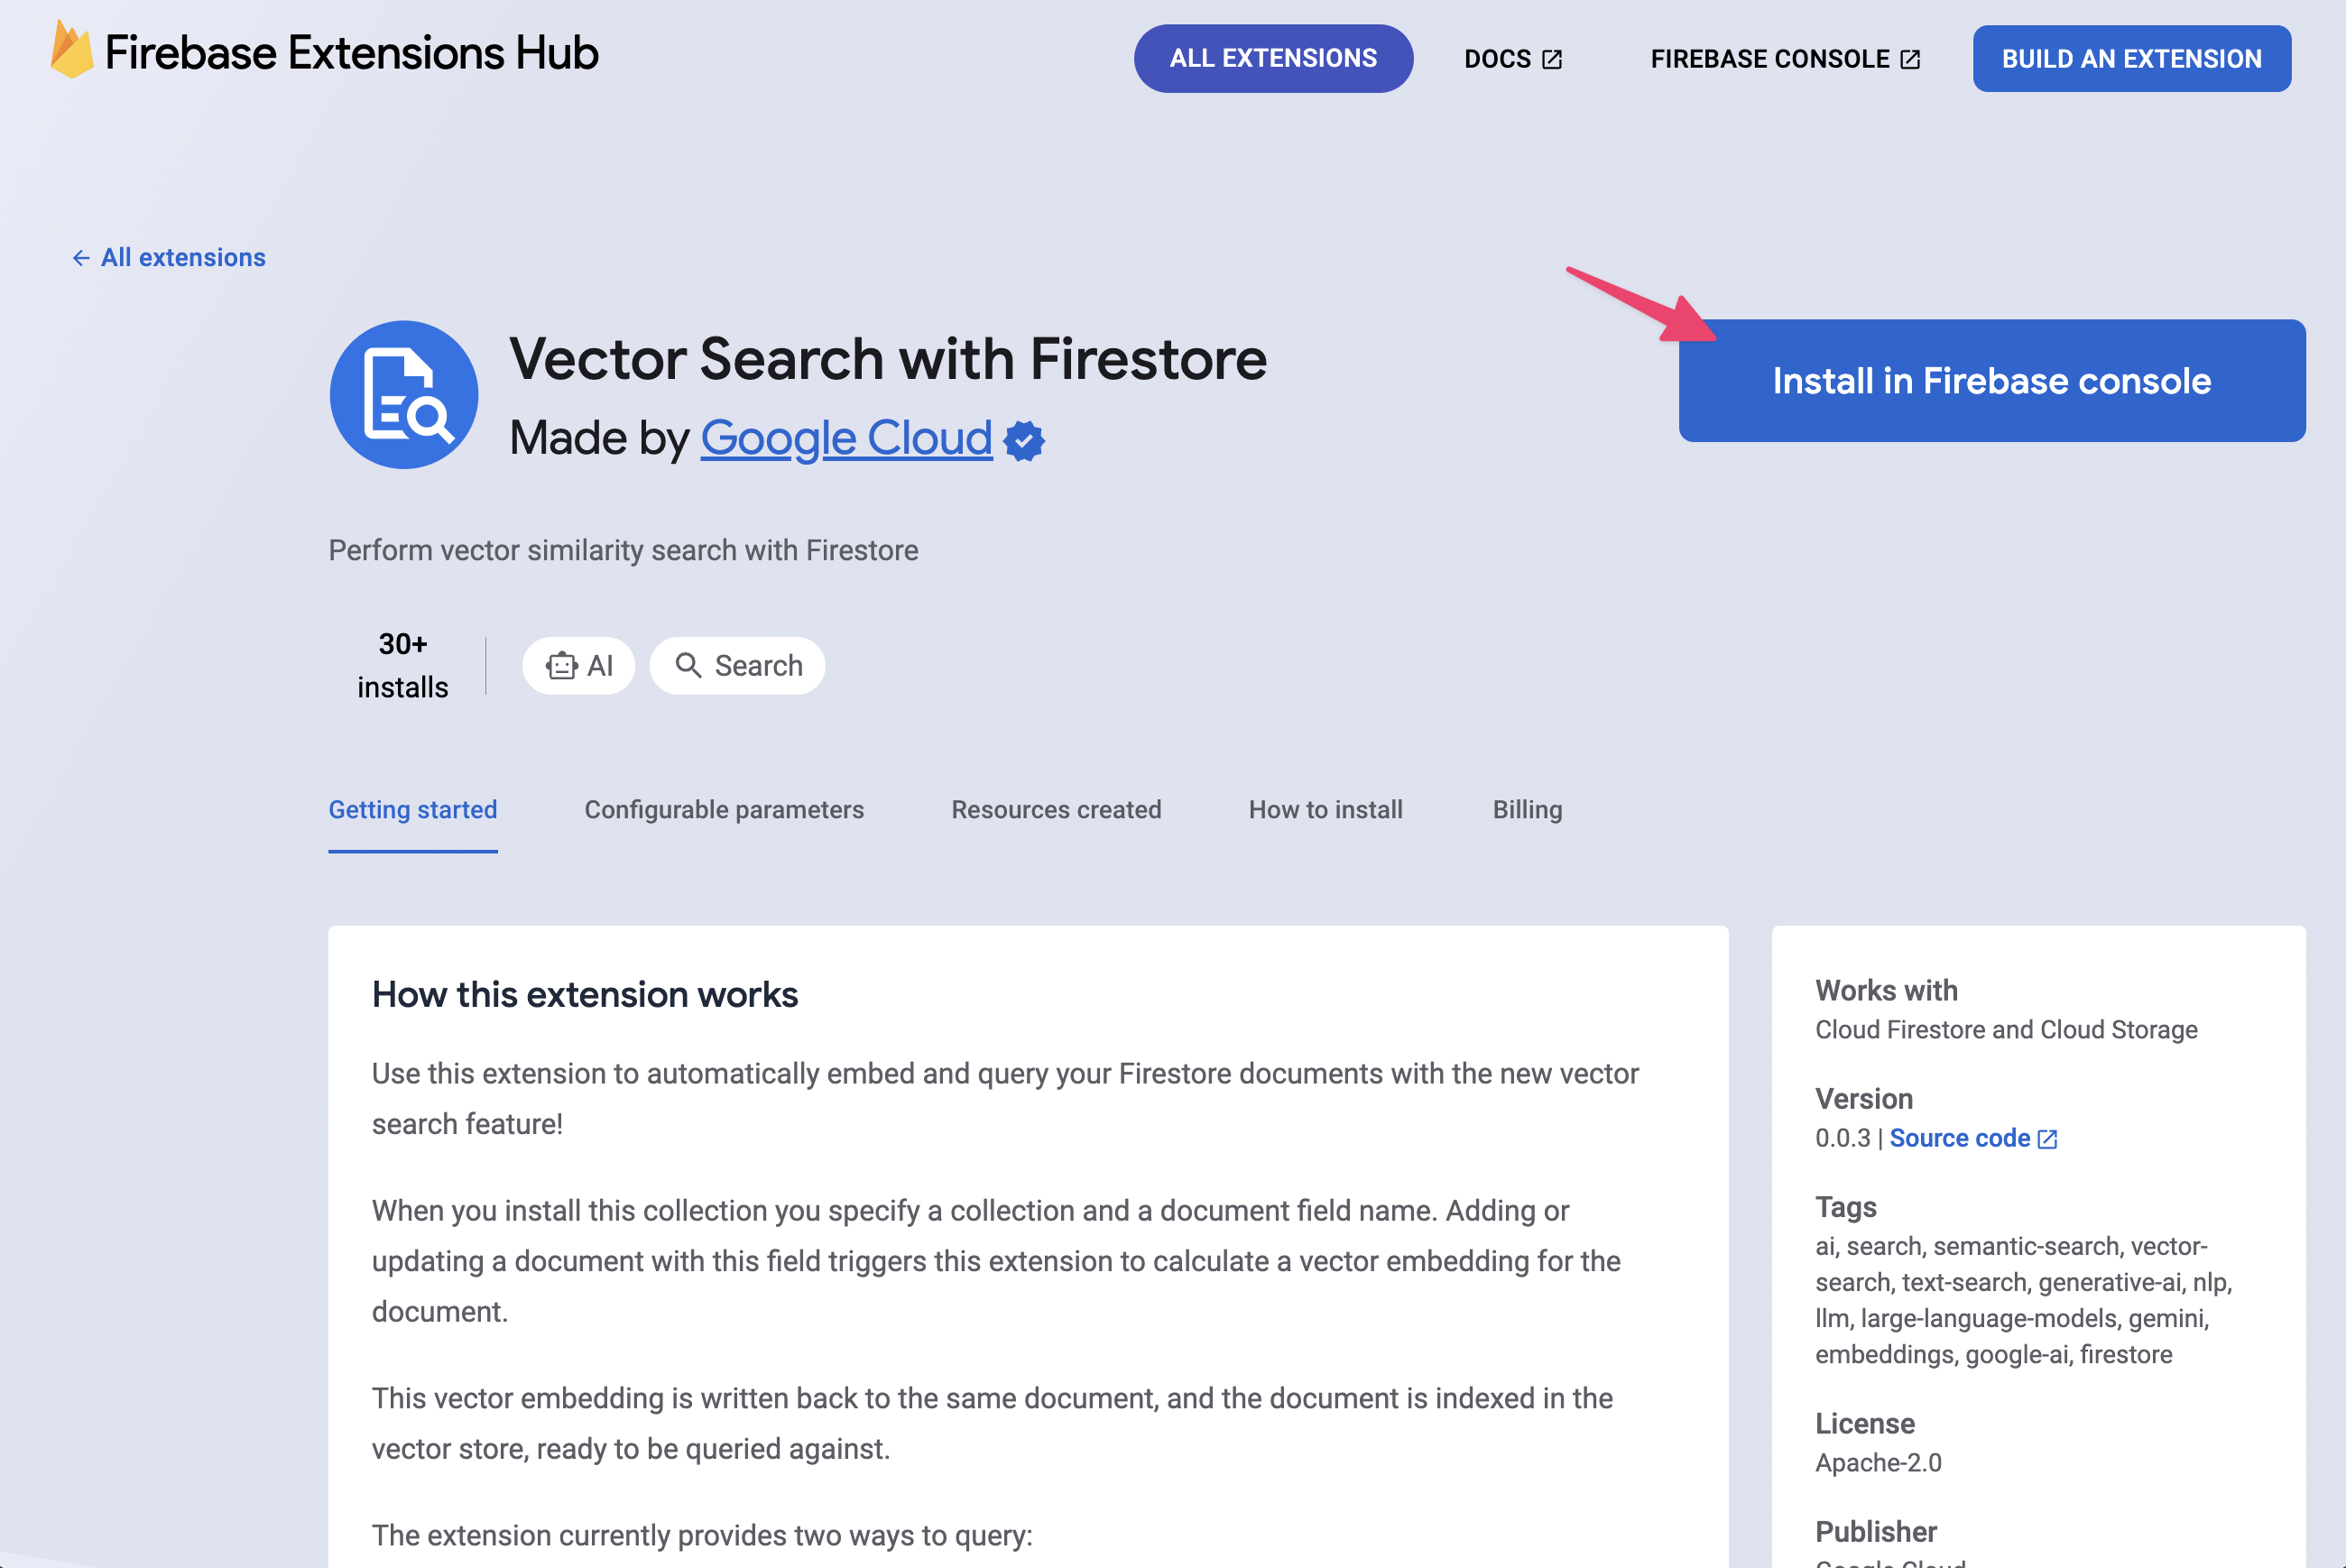 The install button for the Vector Search with Firestore extension